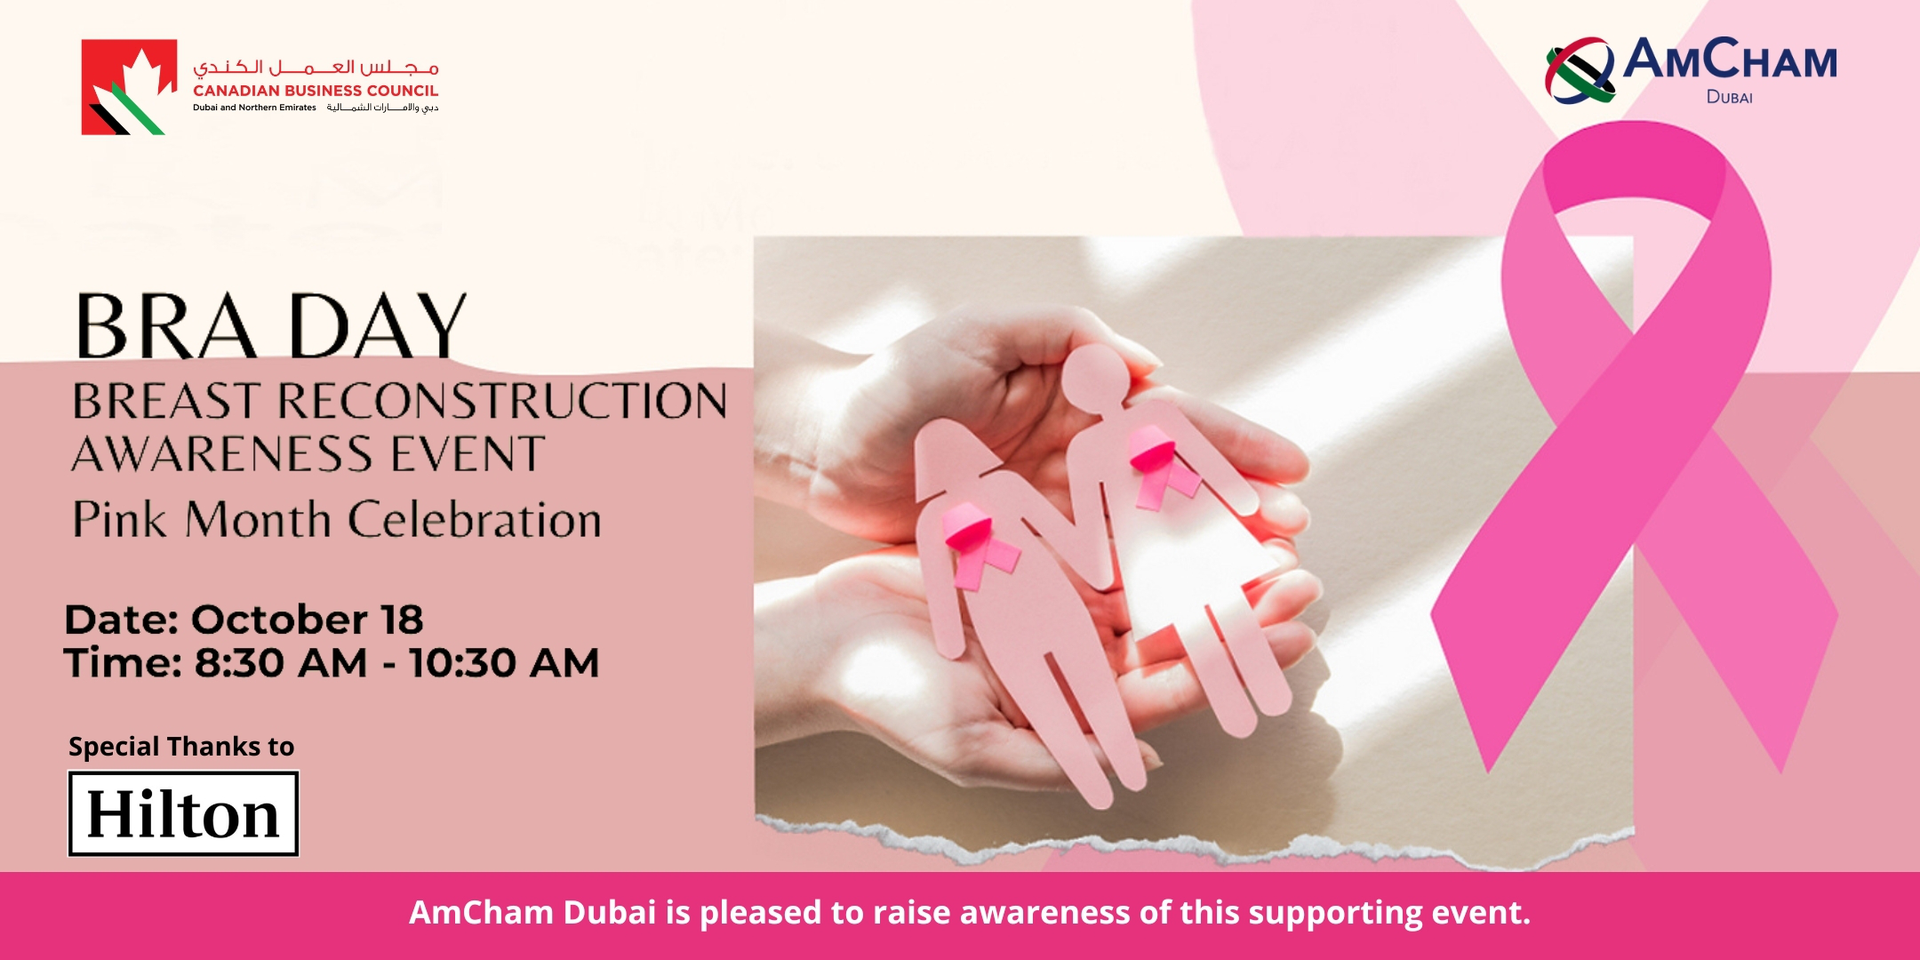 thumbnails Bra Day: Breast Reconstruction Awareness Event